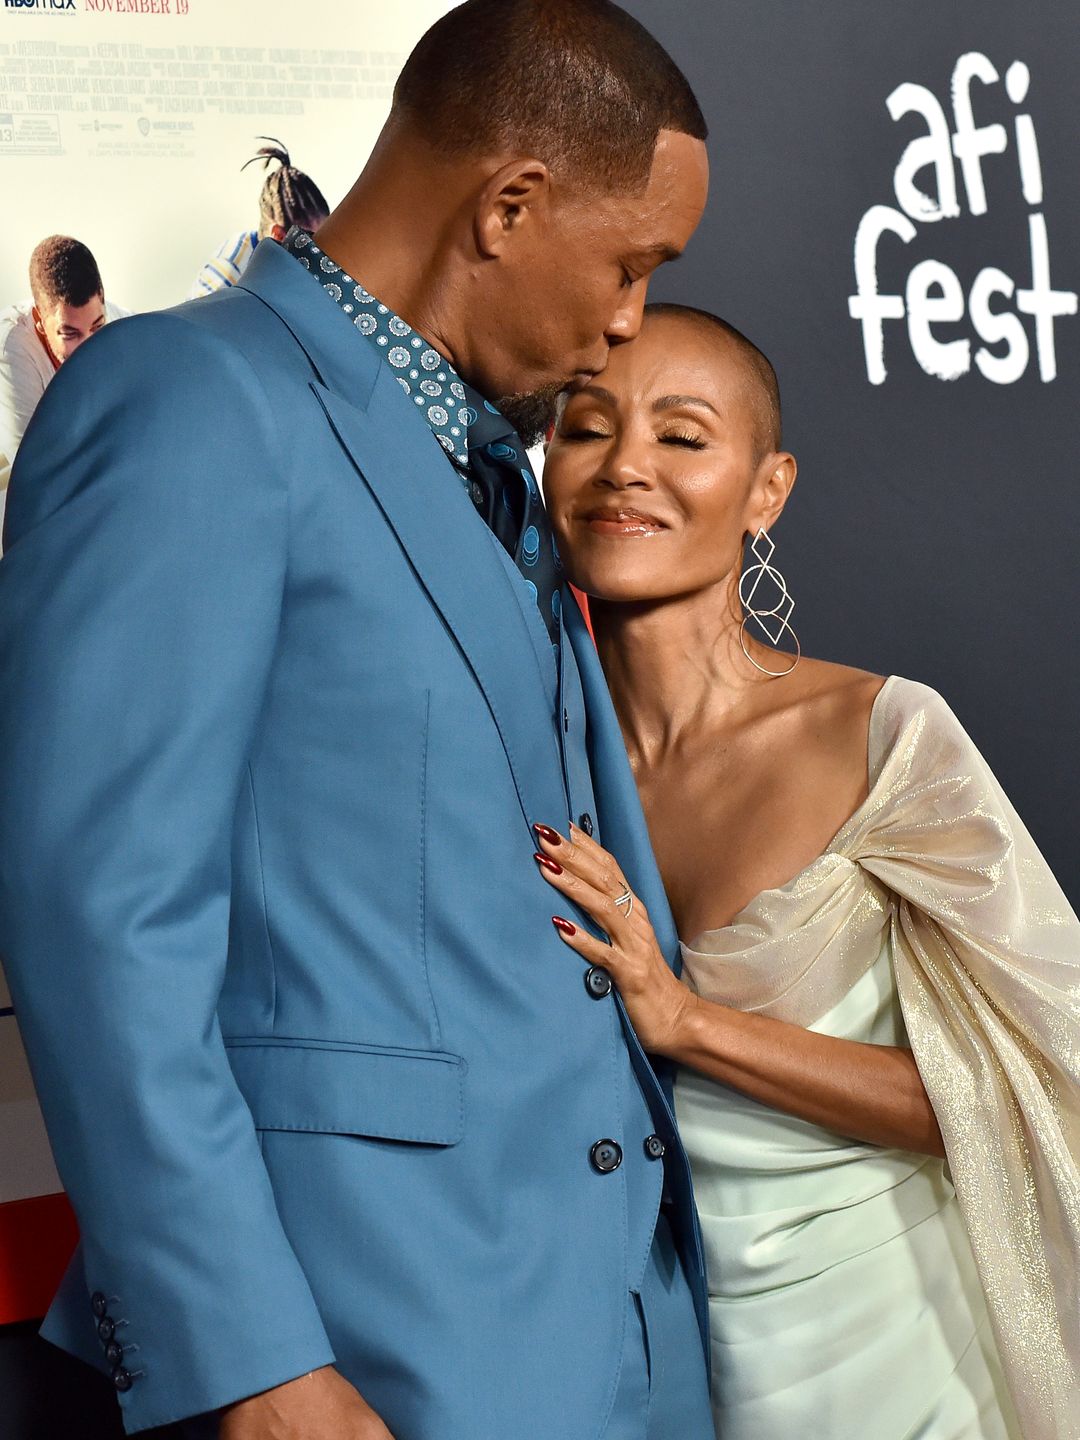 Jada Pinkett Smith and Will Smith cradling each other lovingly while stood for a red carpet photo